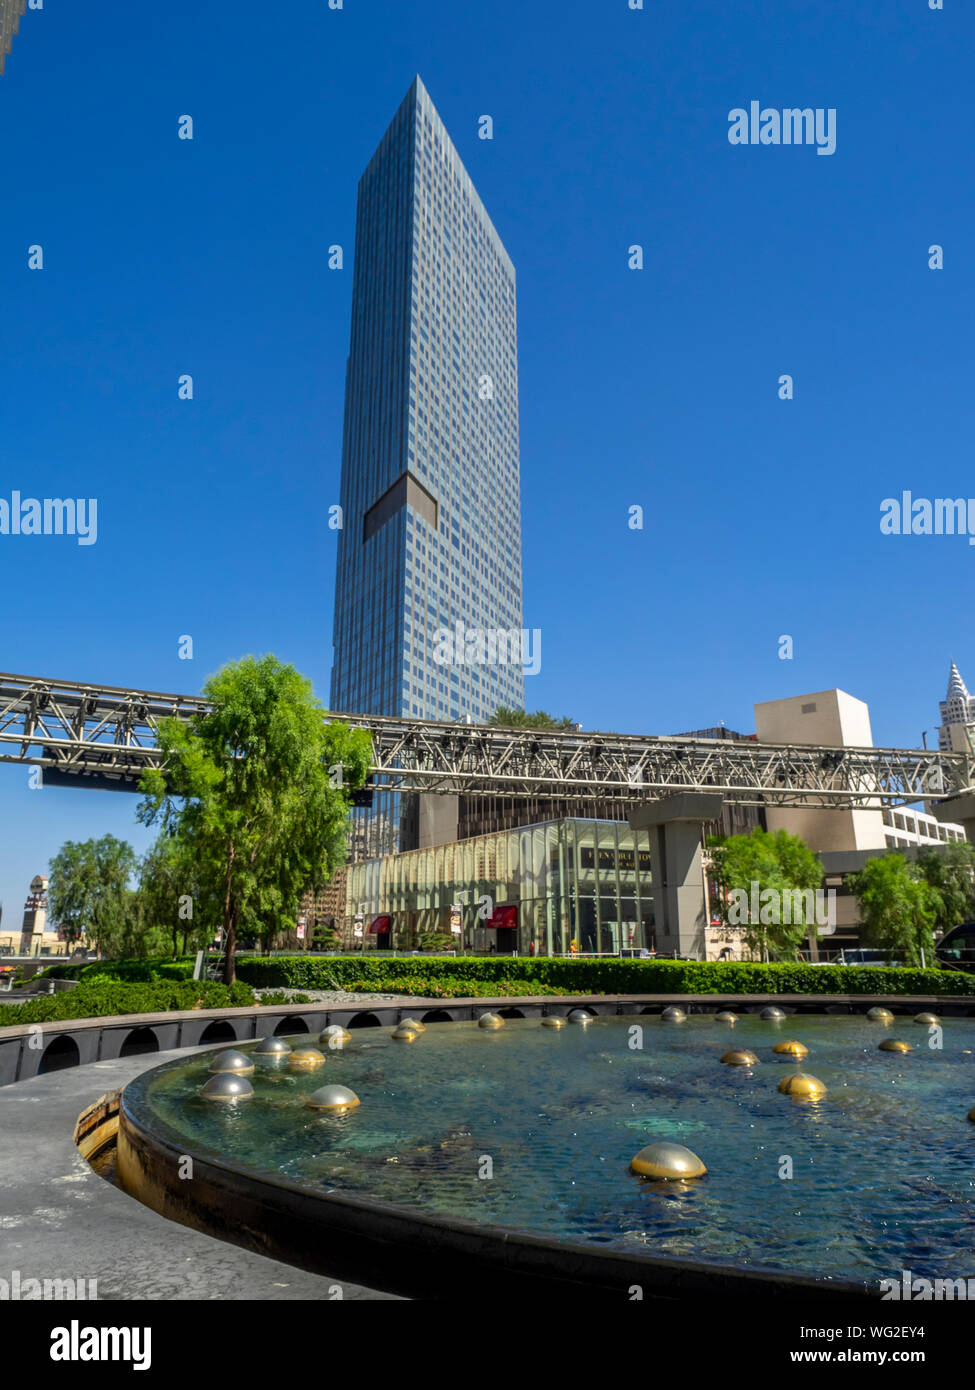 The Mandarin Oriental Resort and Casino in Las Vegas. The Mandarin Oriental Resort is a new 5 star resort and located in the City Center area. Stock Photo